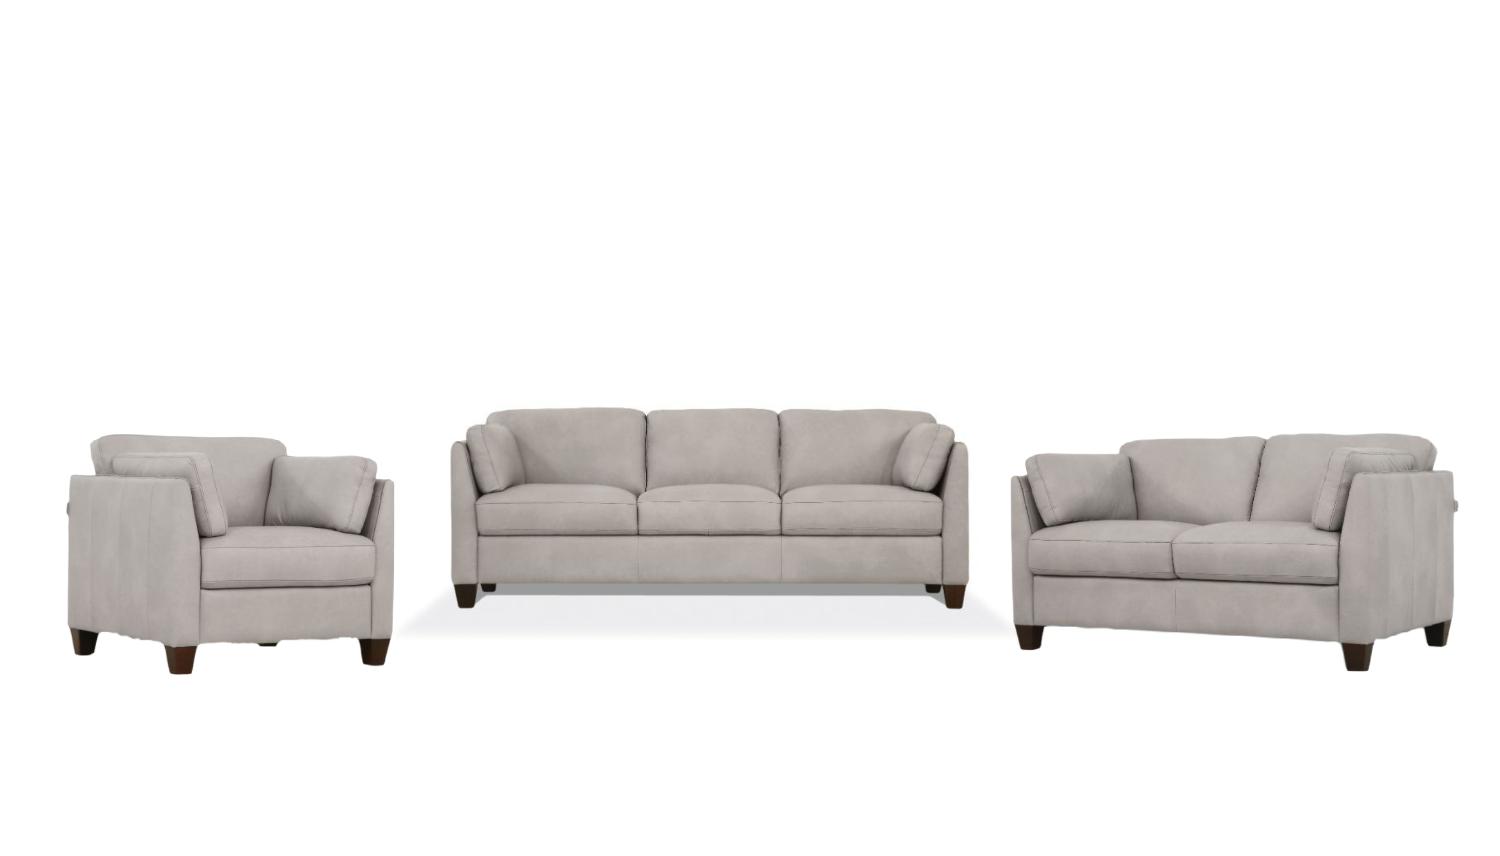 

    
Modern Dusty White Leather Sofa + Loveseat + Chair by Acme Matias 55015-3pcs
